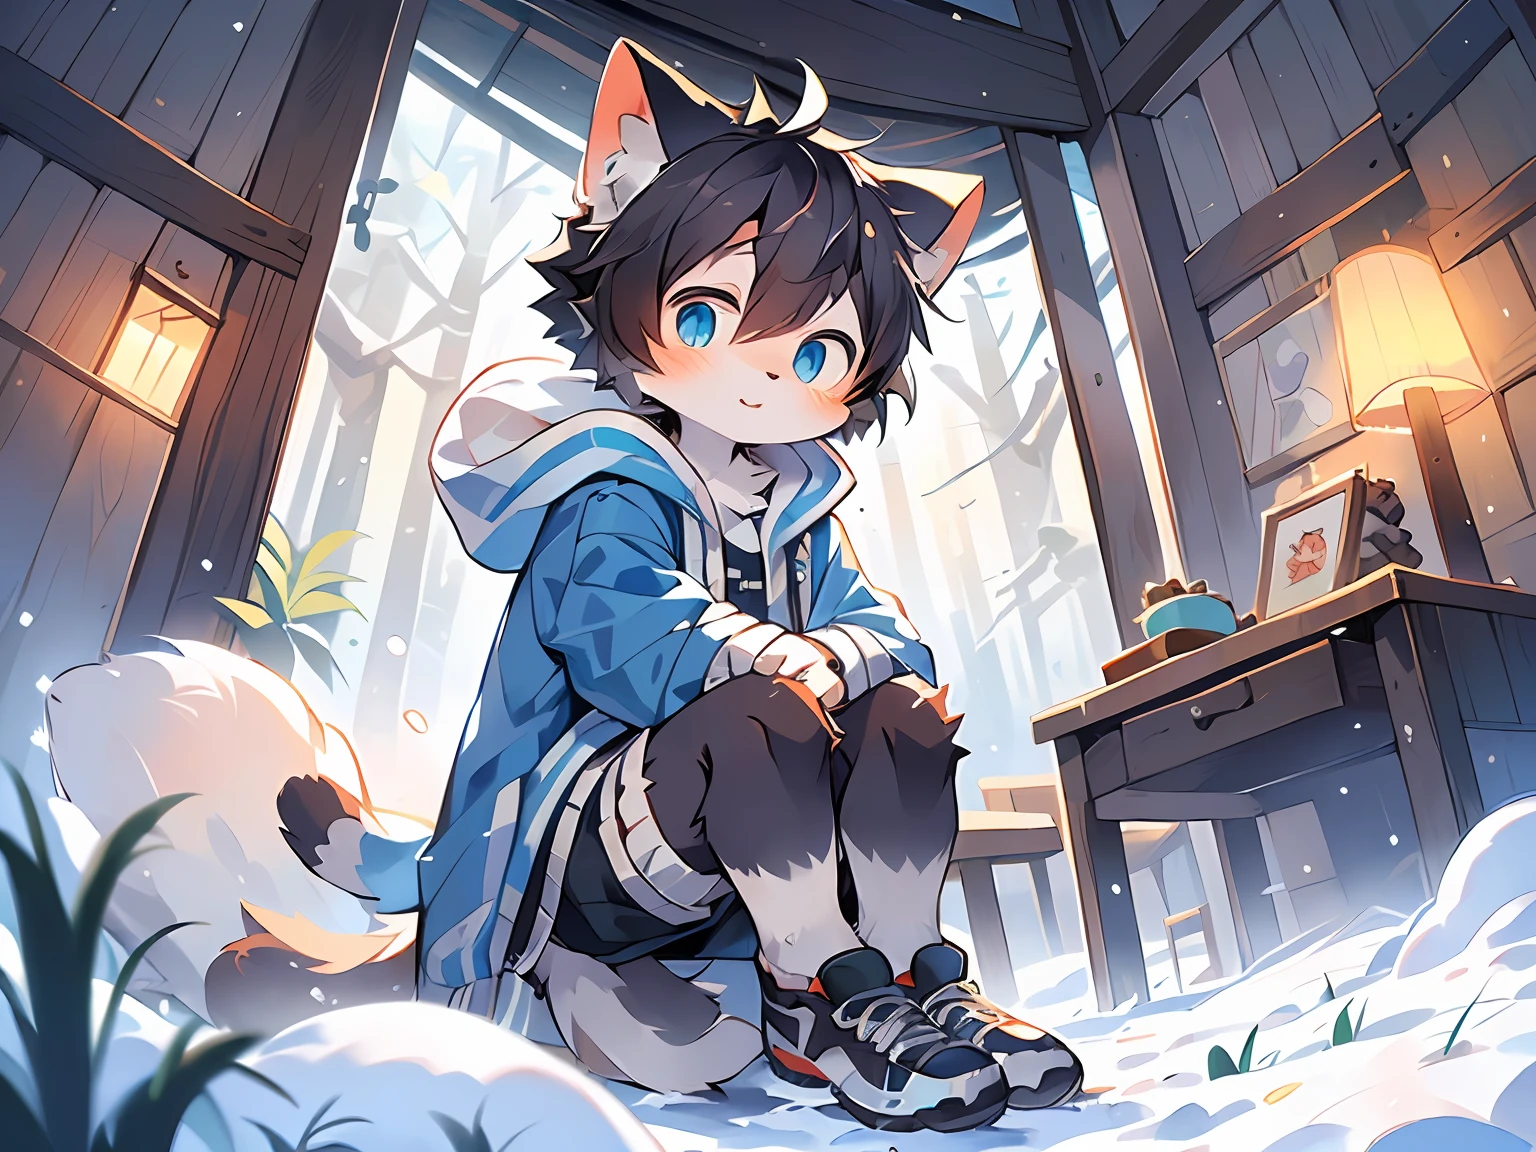 (Snow Environment: 0.8), Masterpiece, High Quality, Abstract Res, Digital Painting\(Artwork\), by Dagasi, Yupa, Kiyosan, (Anthro, Fluffy Fur, Character Focus: 1.1), Anthro Male Cat, Short Hair, Portrait , bright eyes, panorama, character focus. ( Solo, Furry, Furry Male, Cat, Black Fur, Gray Pattern, Blue Coat, Fluffy Shorts, Blue Eyes, Black Hair, Shoes, Wide Coat, White Shirt, Introvert, Silence,